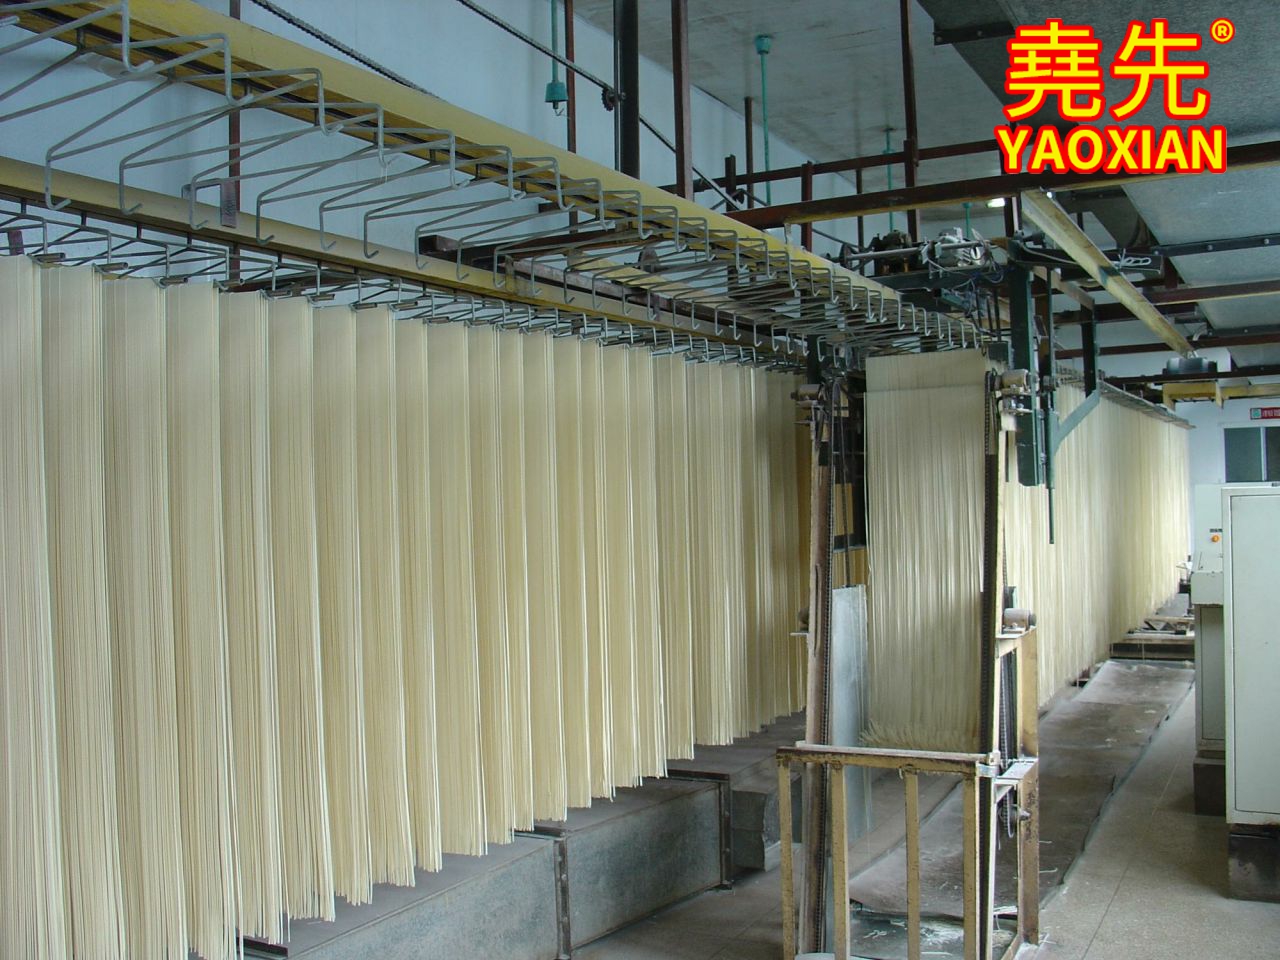 Dough noodle machinery has become a new driving force for innovation in noodle efficiency